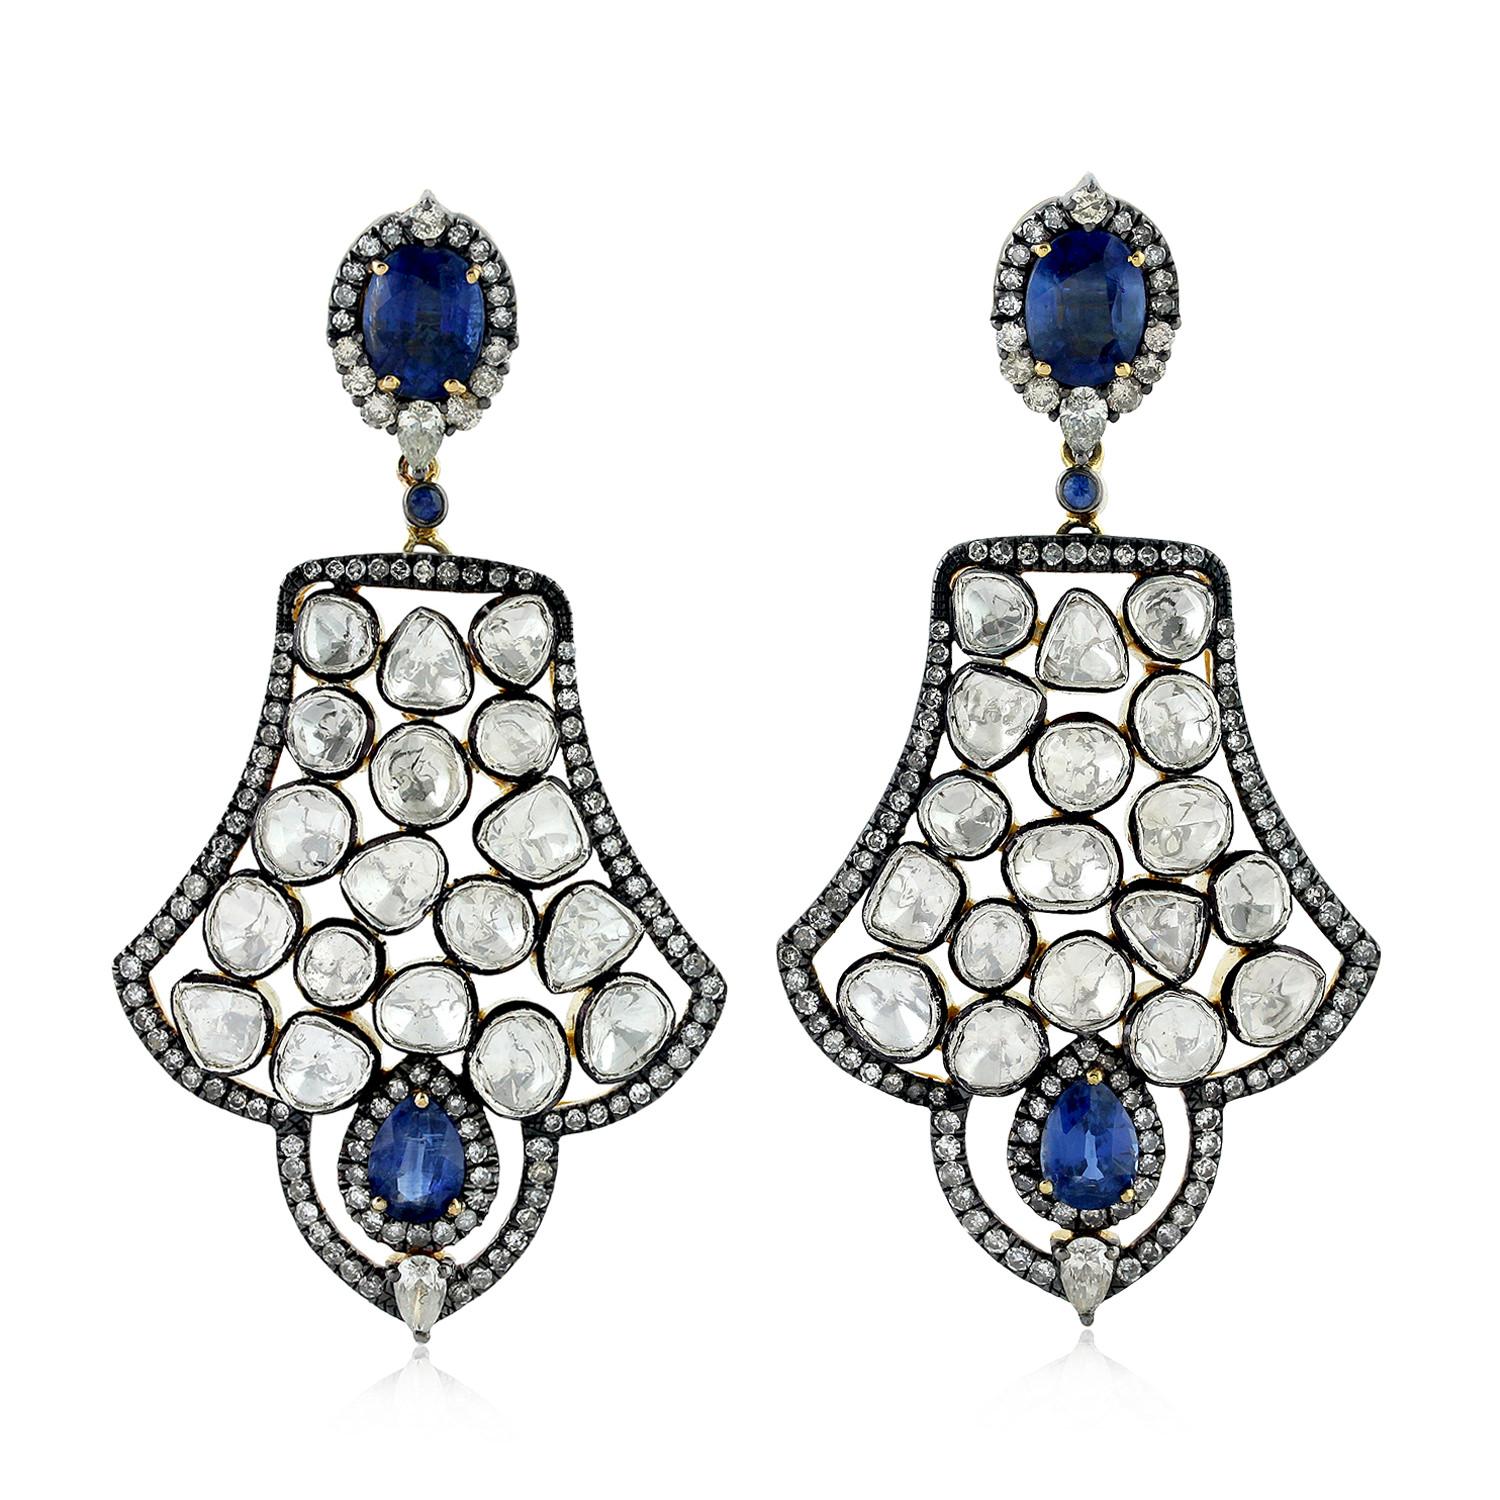 Contemporary Blue Sapphire Polki Diamond Dangle Earrings with Sterling Silver and 18k Gold